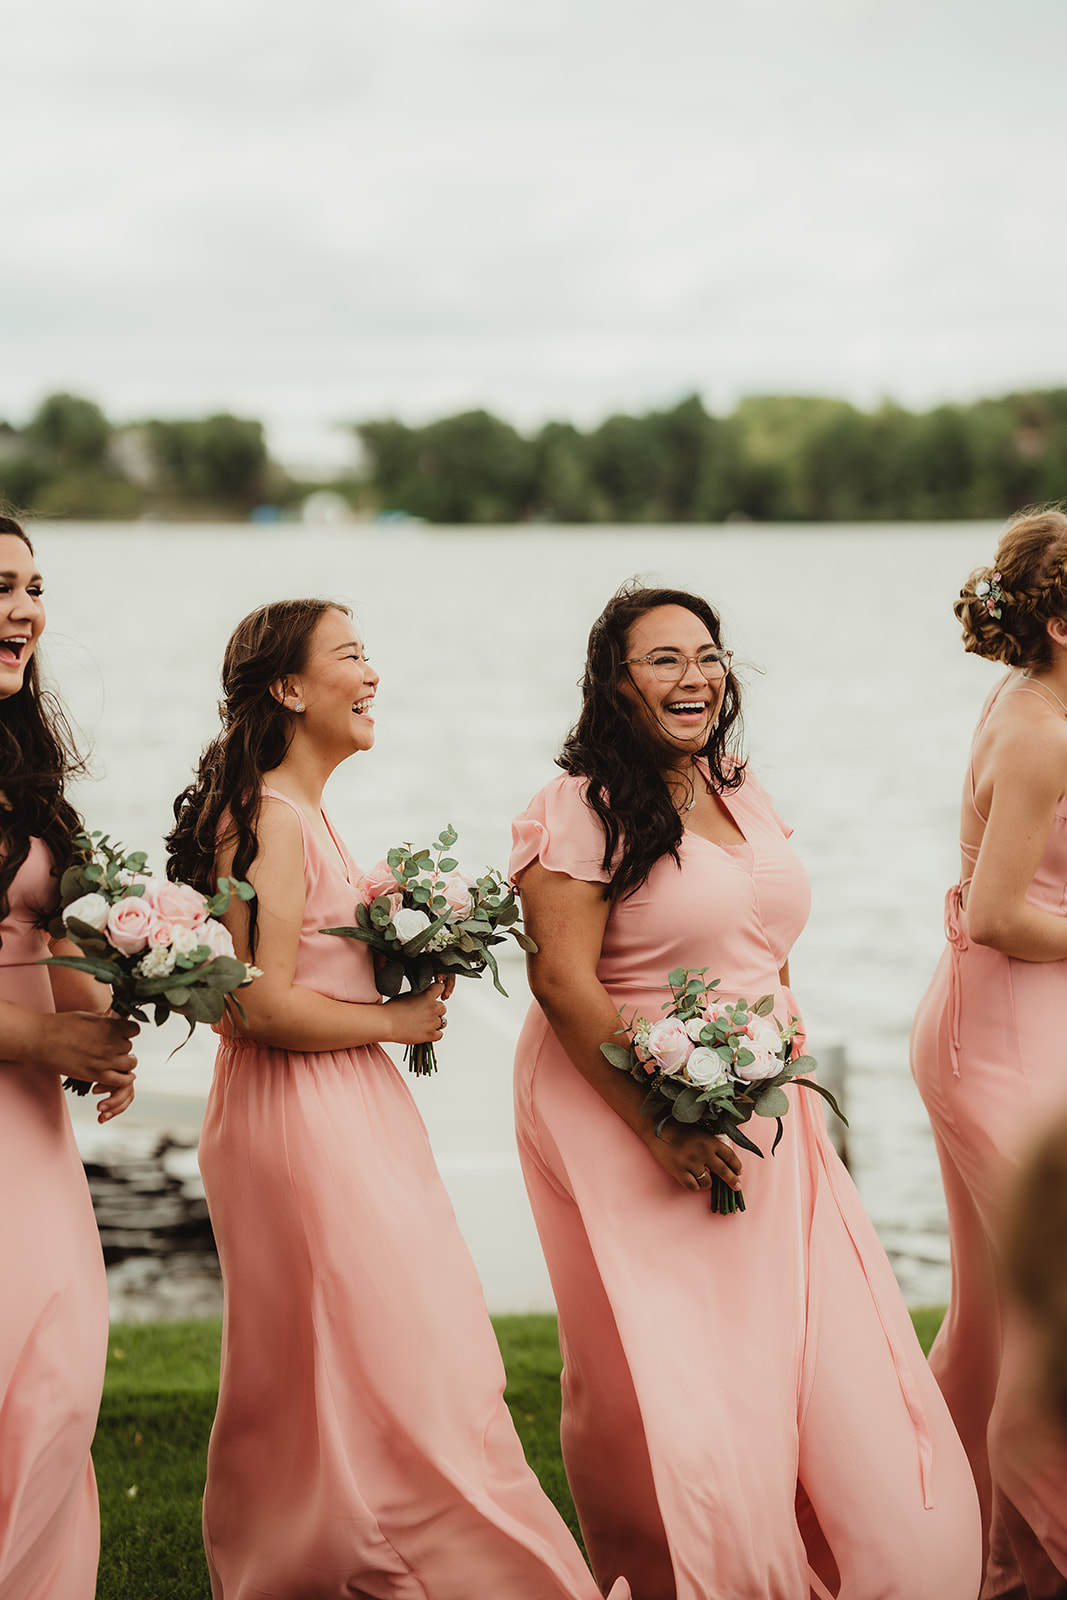 The bridesmaids laugh together in their blush pink bridesmaids dresses during a Wisconsin wedding ceremony. Lake wedding Pink bridesmaids Bridesmaids florals #wisconsinweddingphotographer #choosingaphotographer #lakesidewedding #waterfrontweddingceremony